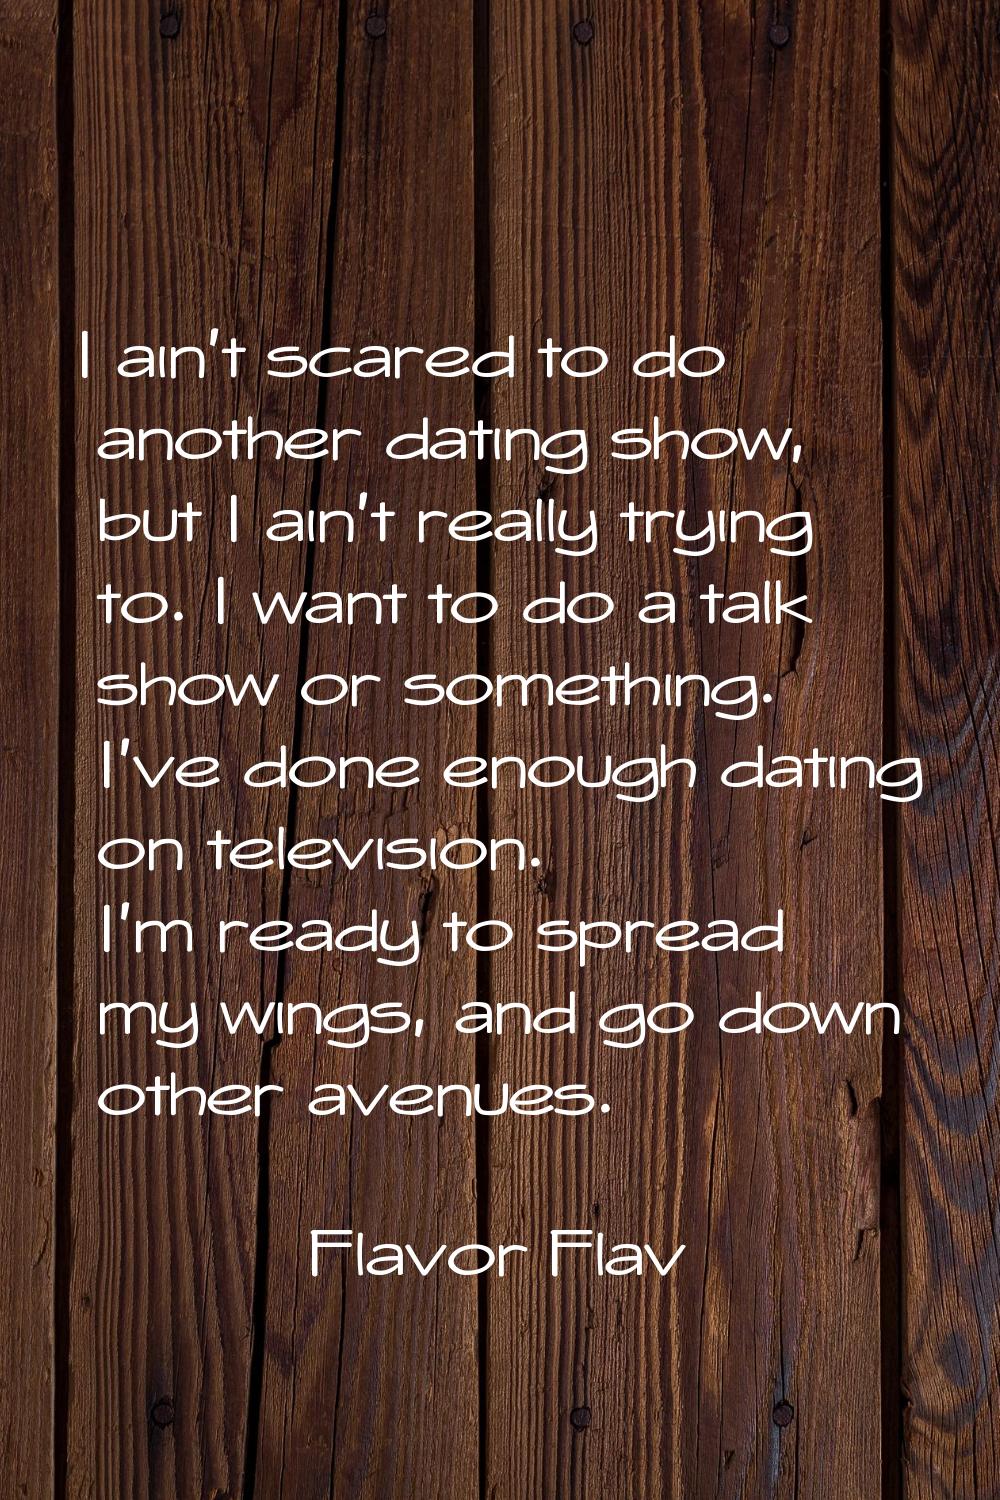 I ain't scared to do another dating show, but I ain't really trying to. I want to do a talk show or